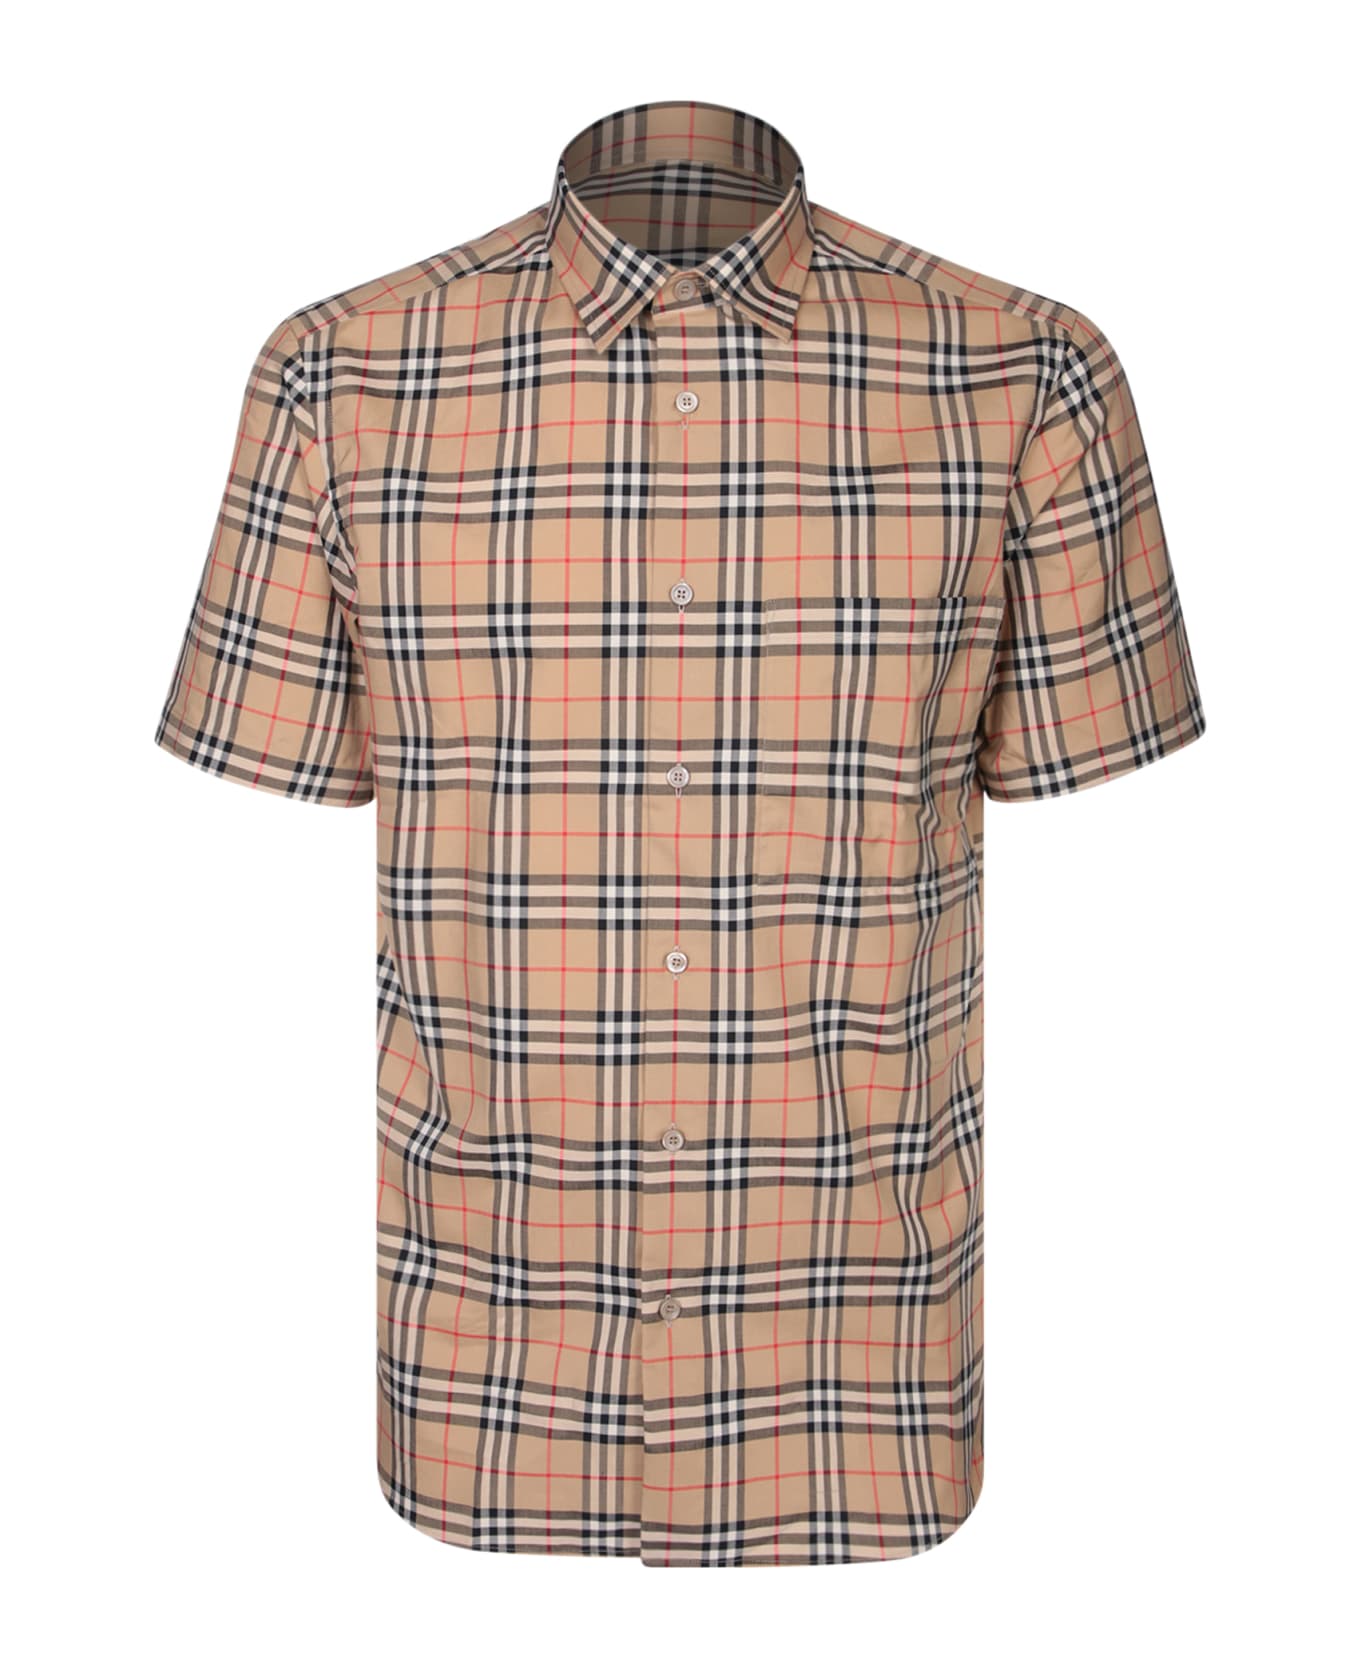 Burberry Vintage Check Shirt In Cotton - Beige